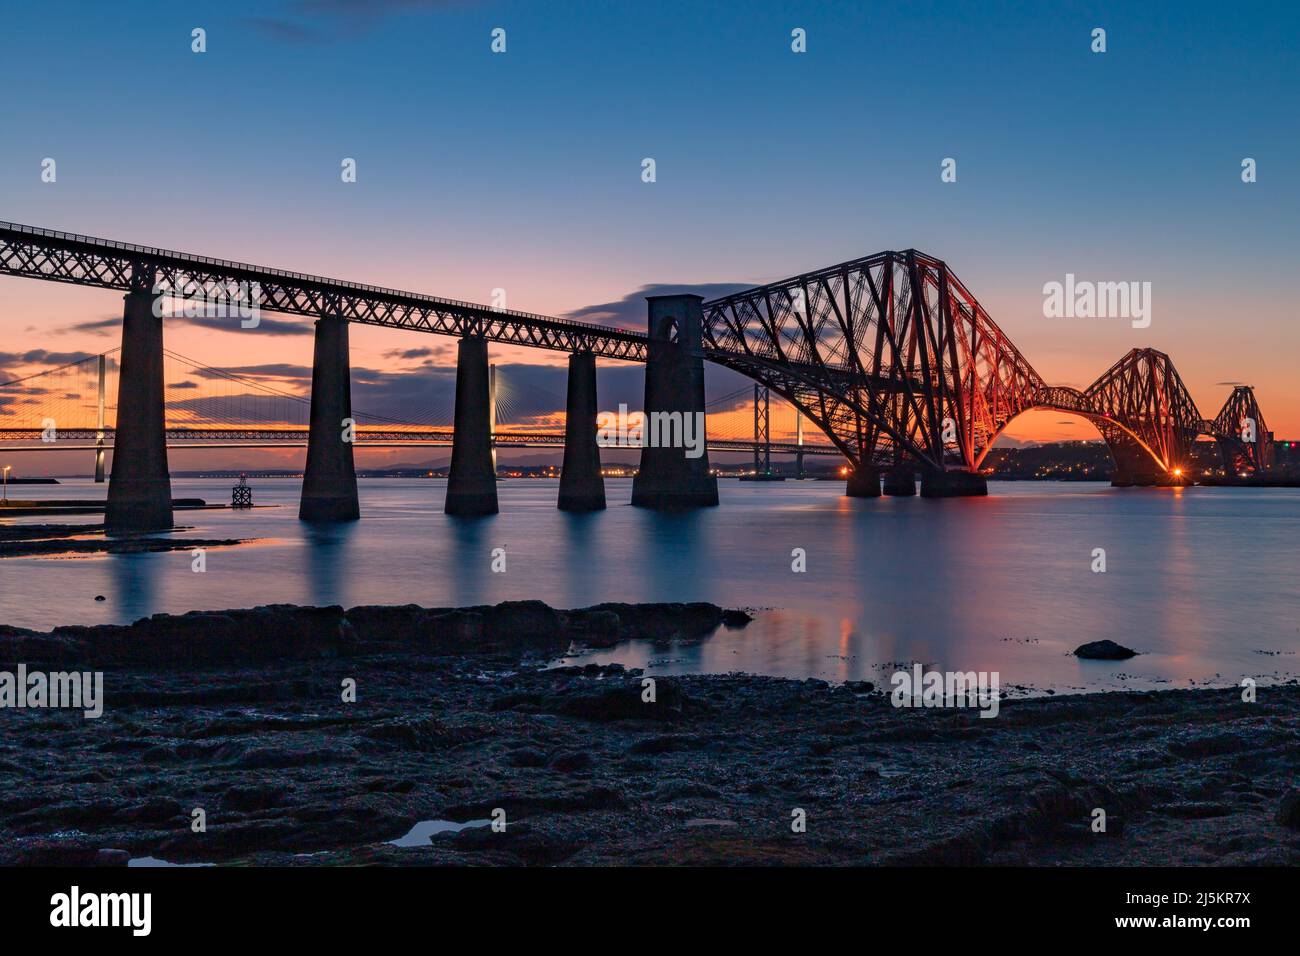 The Forth Bridge in Scotland at sunset Stock Photo